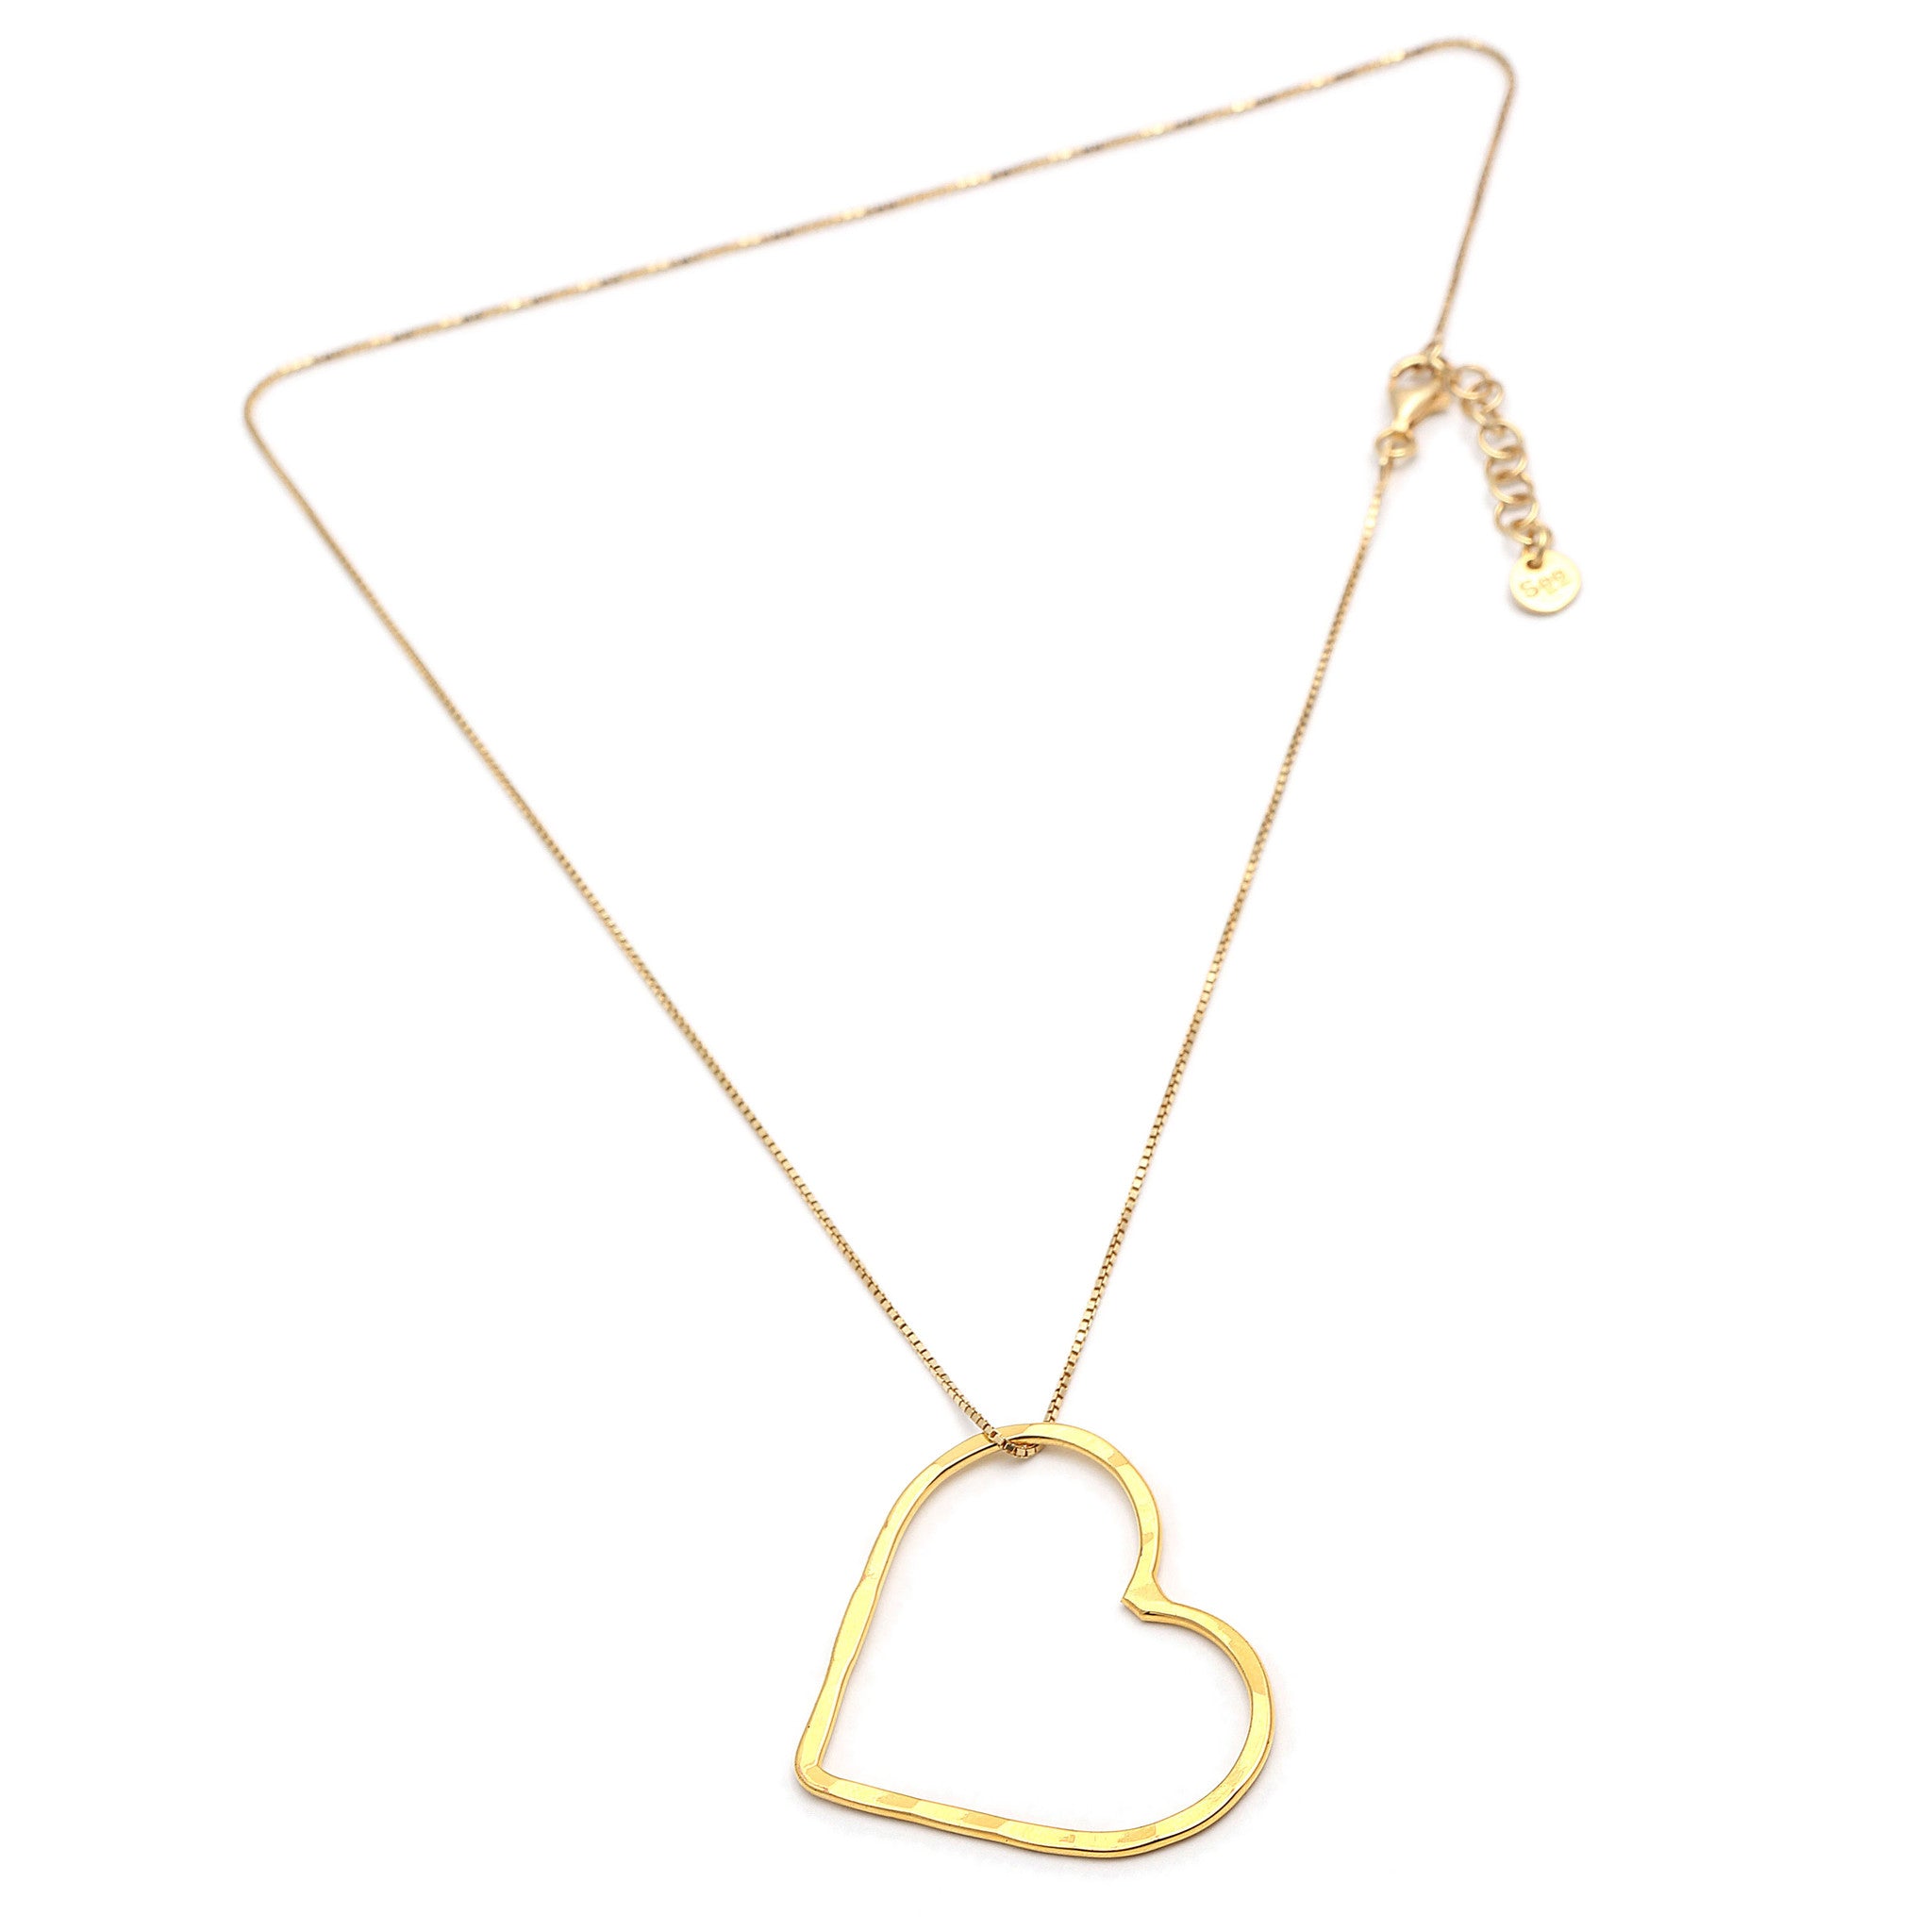 Necklaces | Gold, Silver & Statement Heart Jewelry | SEEME.ORG - SeeMe ...